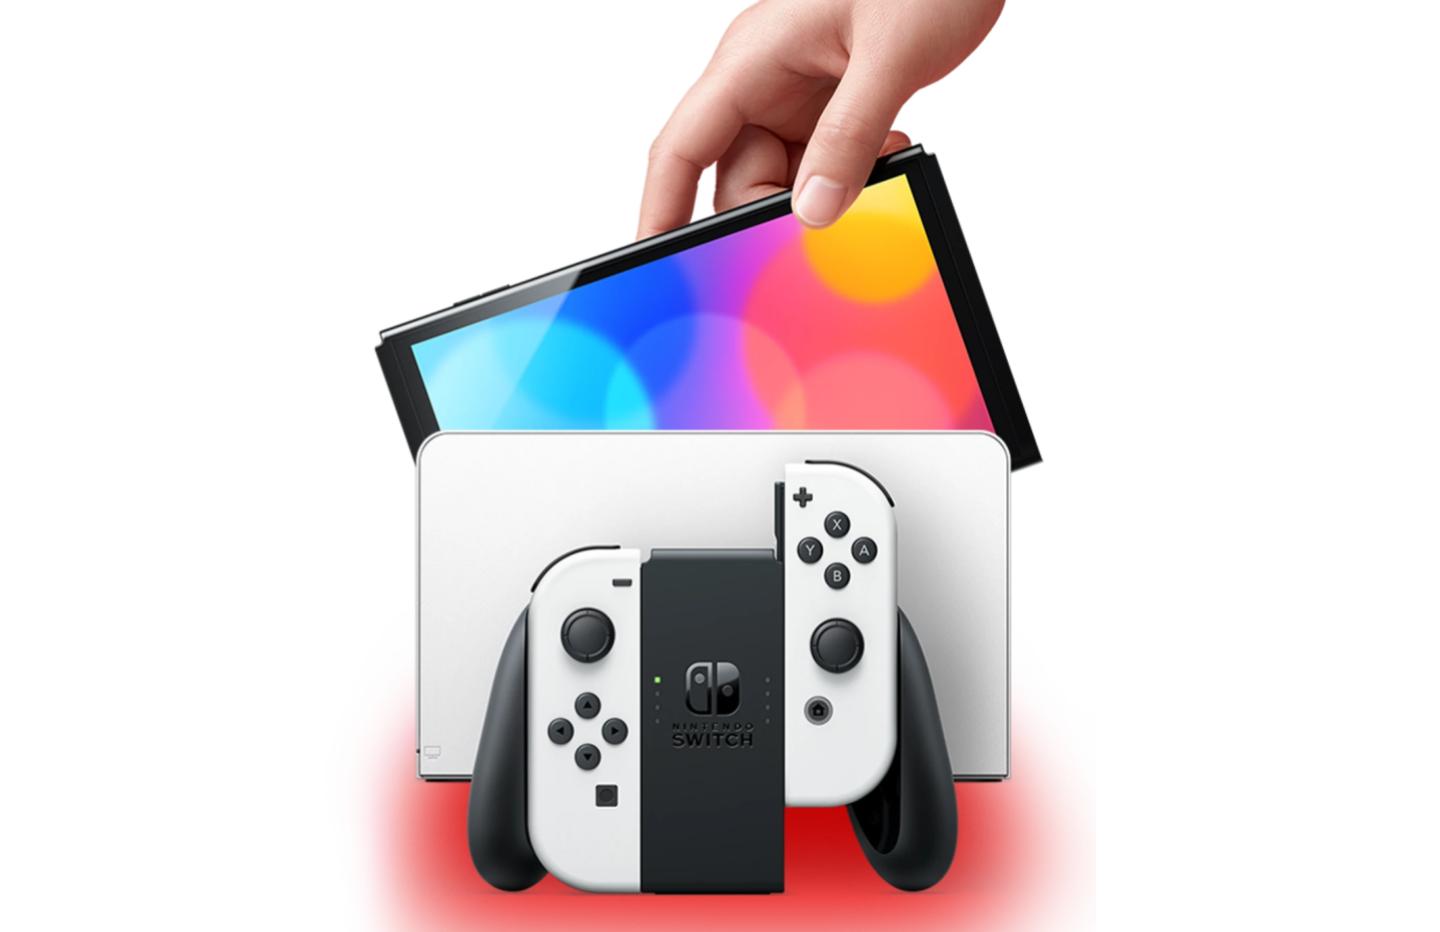 The Nintendo Switch OLED is now available for pre-order at 349 